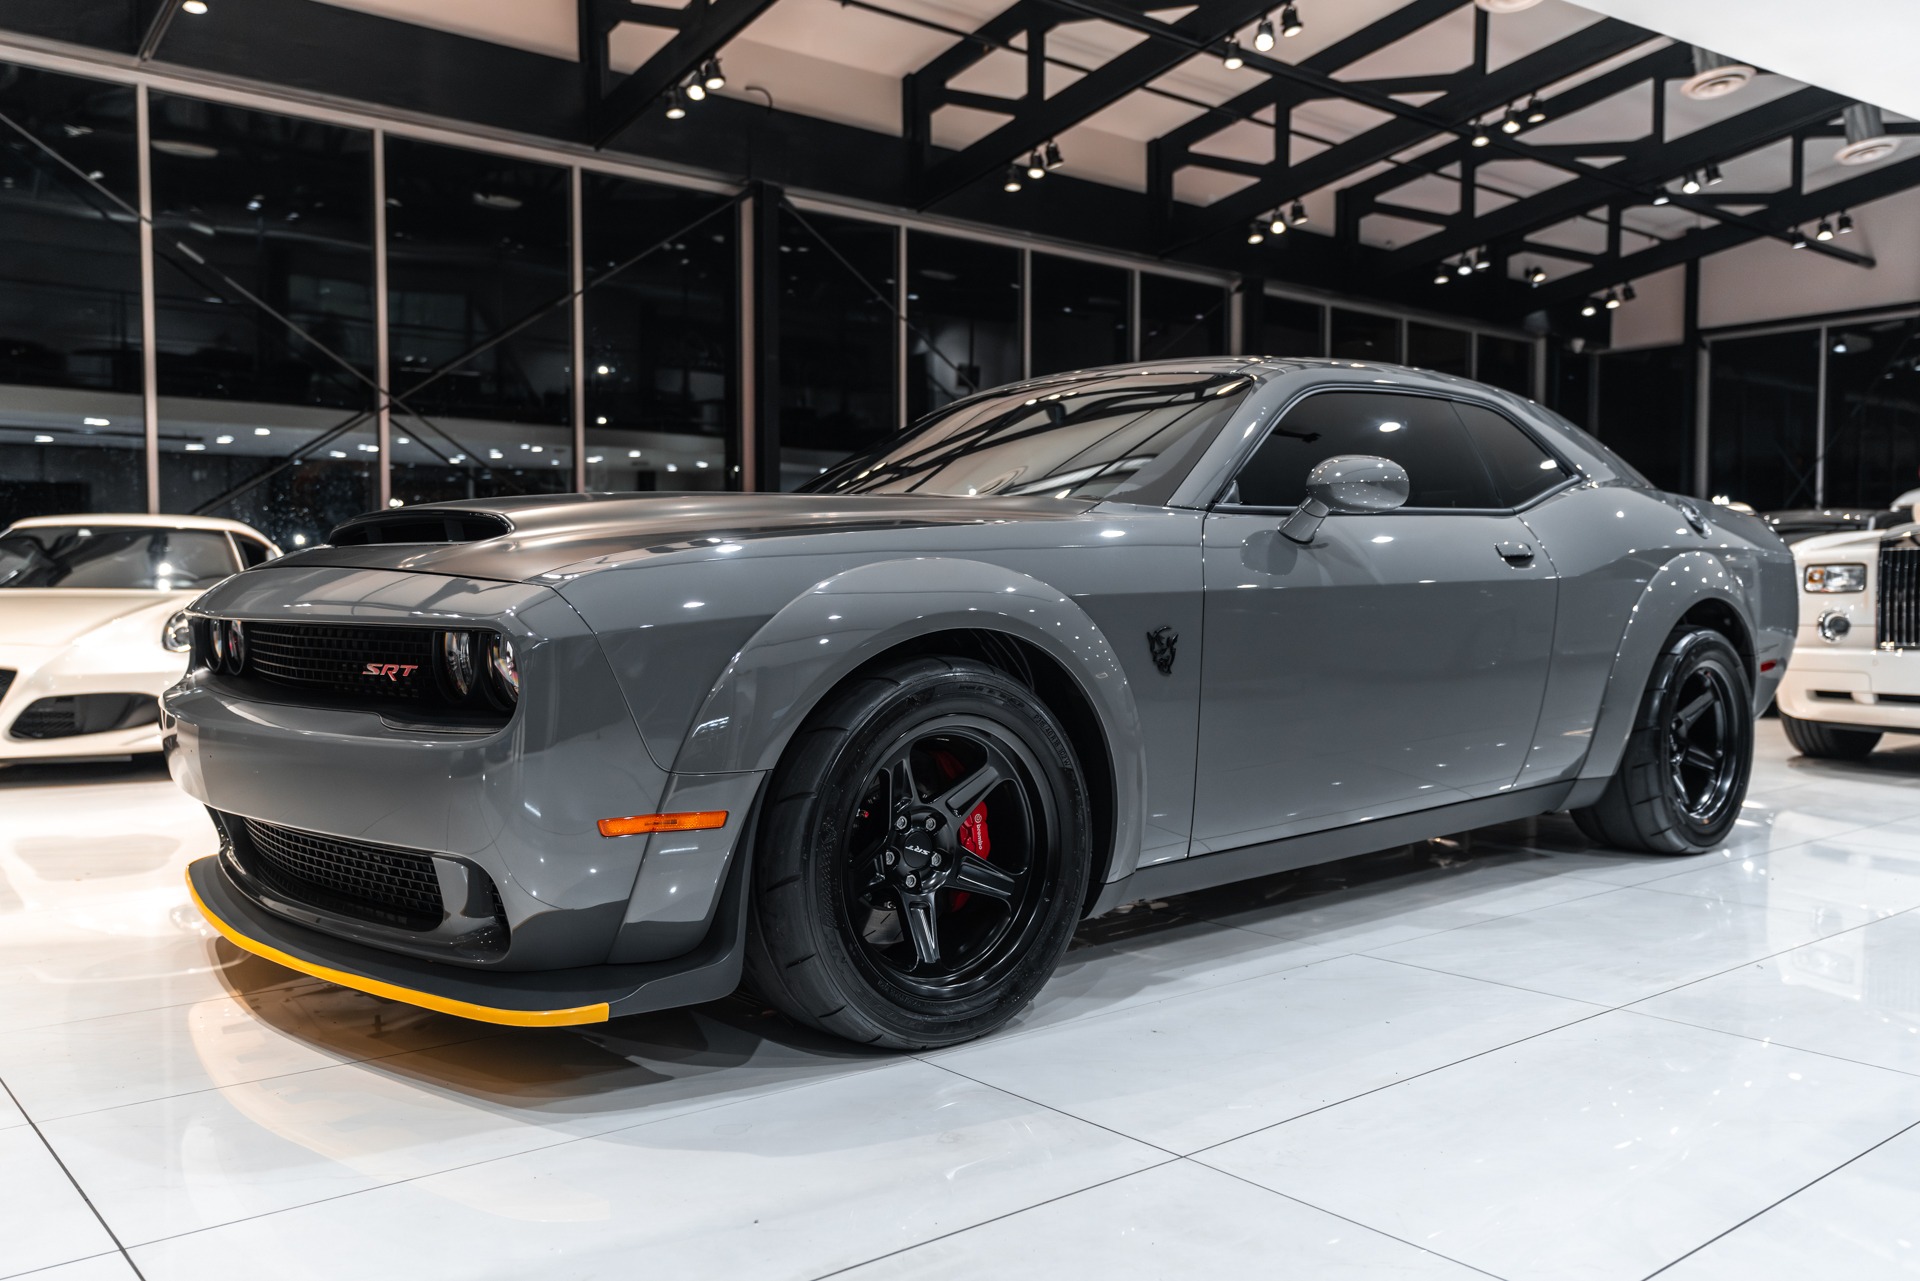 Used-2018-Dodge-Challenger-SRT-Demon-Only-341-Miles-Destroyer-Gray-Collector-Quality-Crate-Included